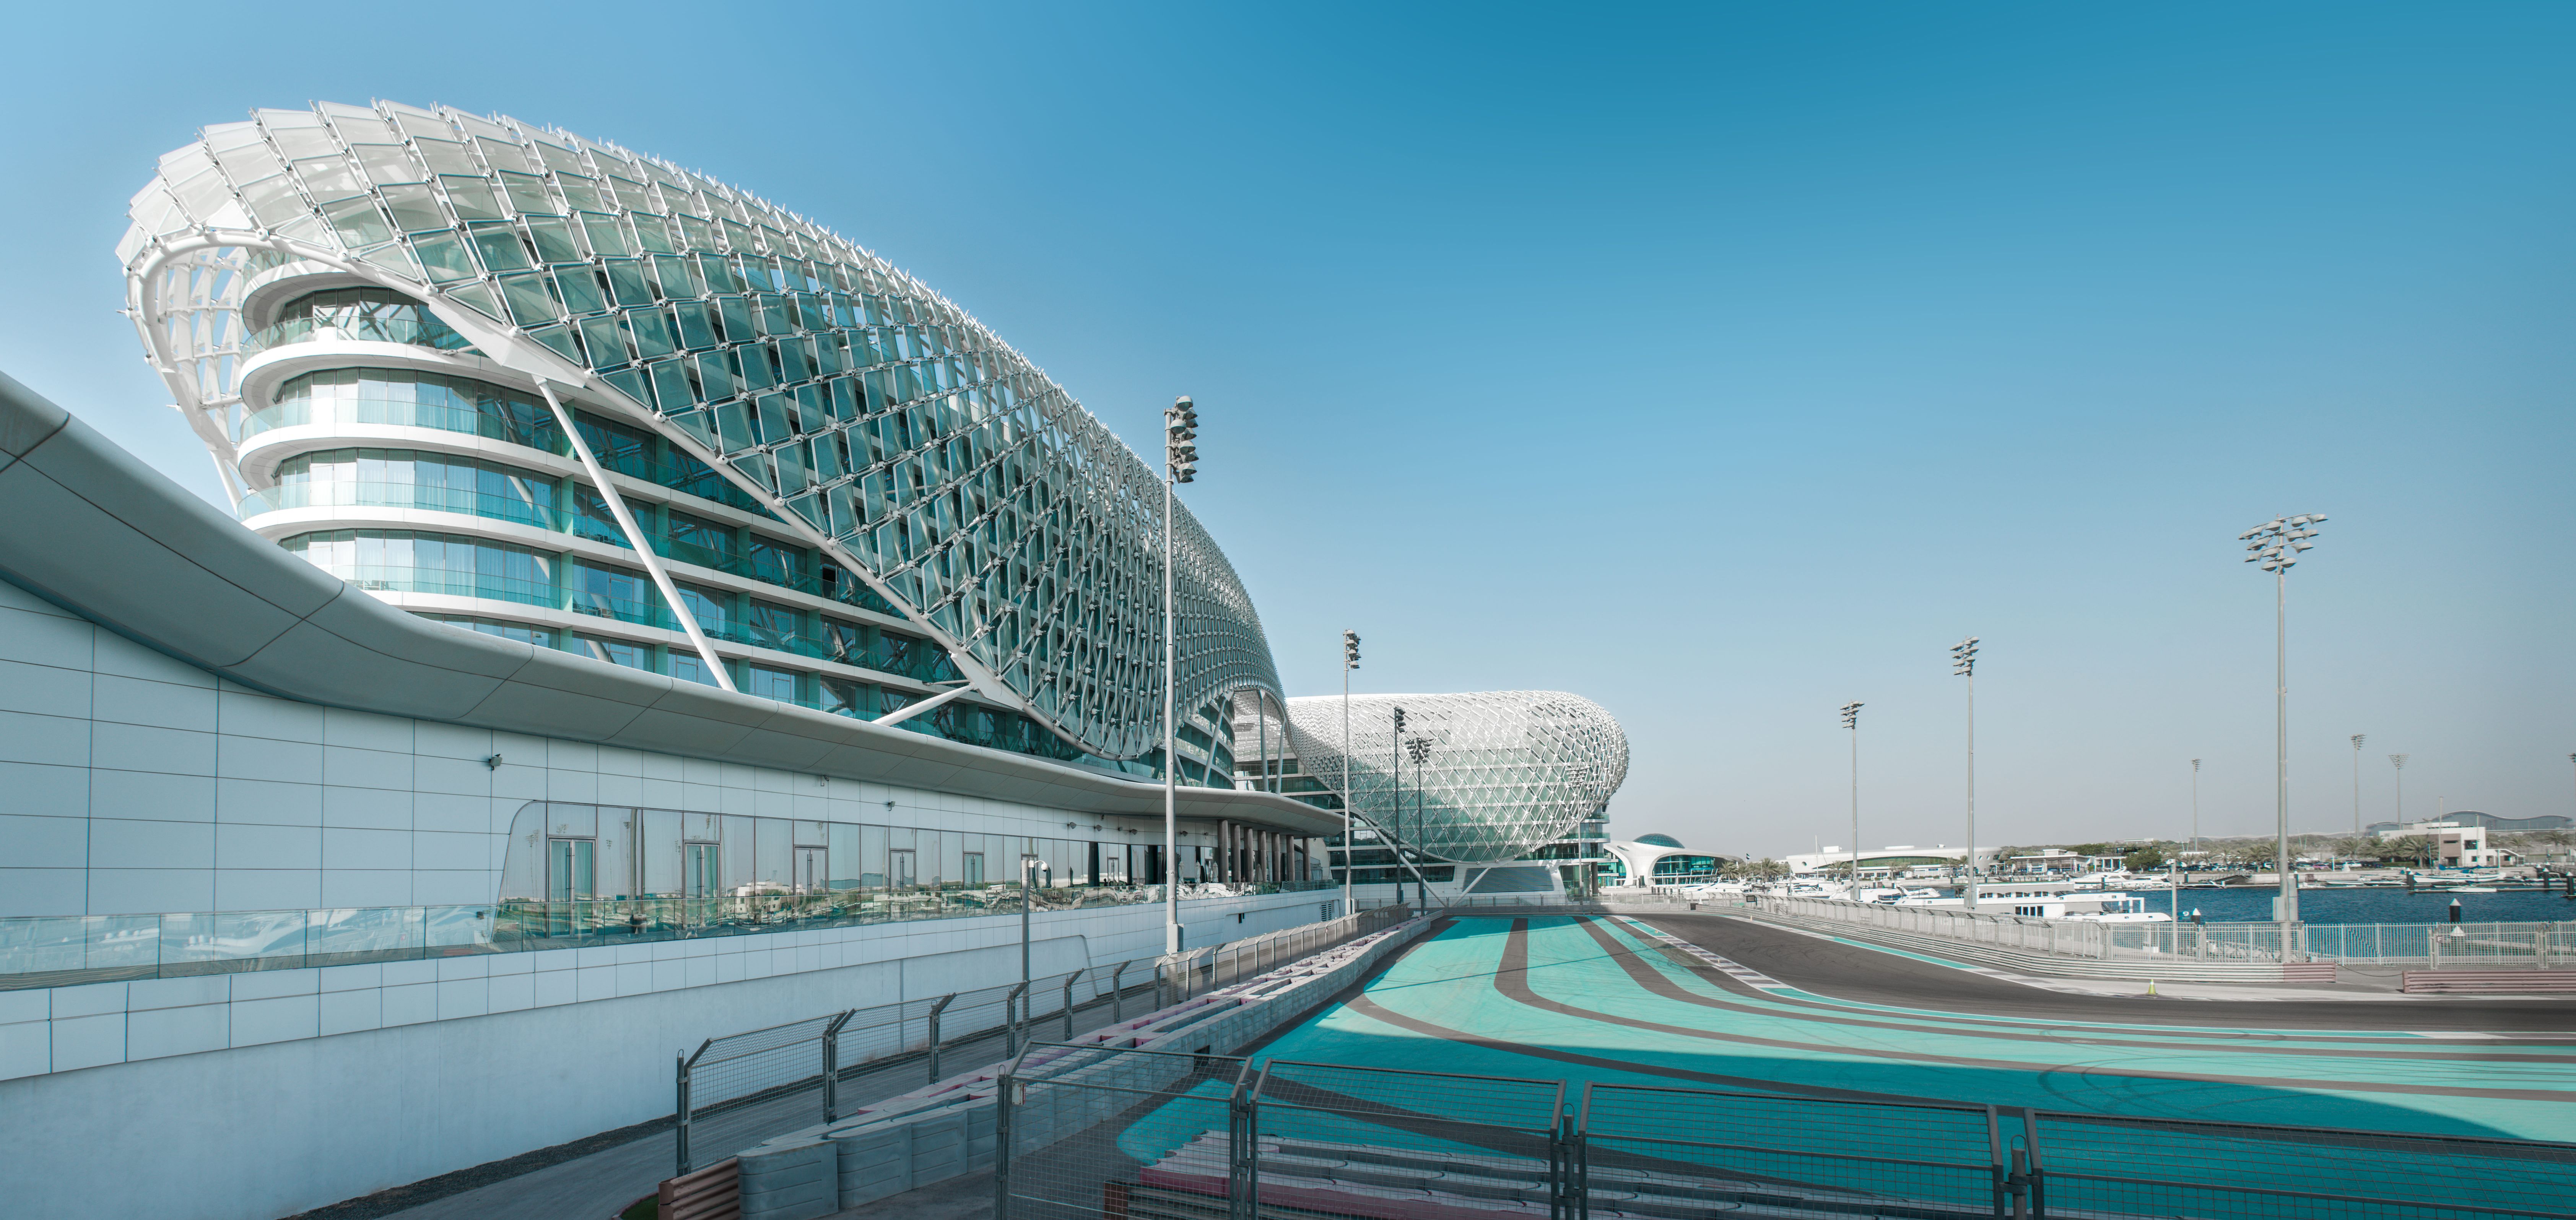 Tour Sheikh Zayed Grand Mosque And Louvre, Stop At Yas Viceroy For Refreshment